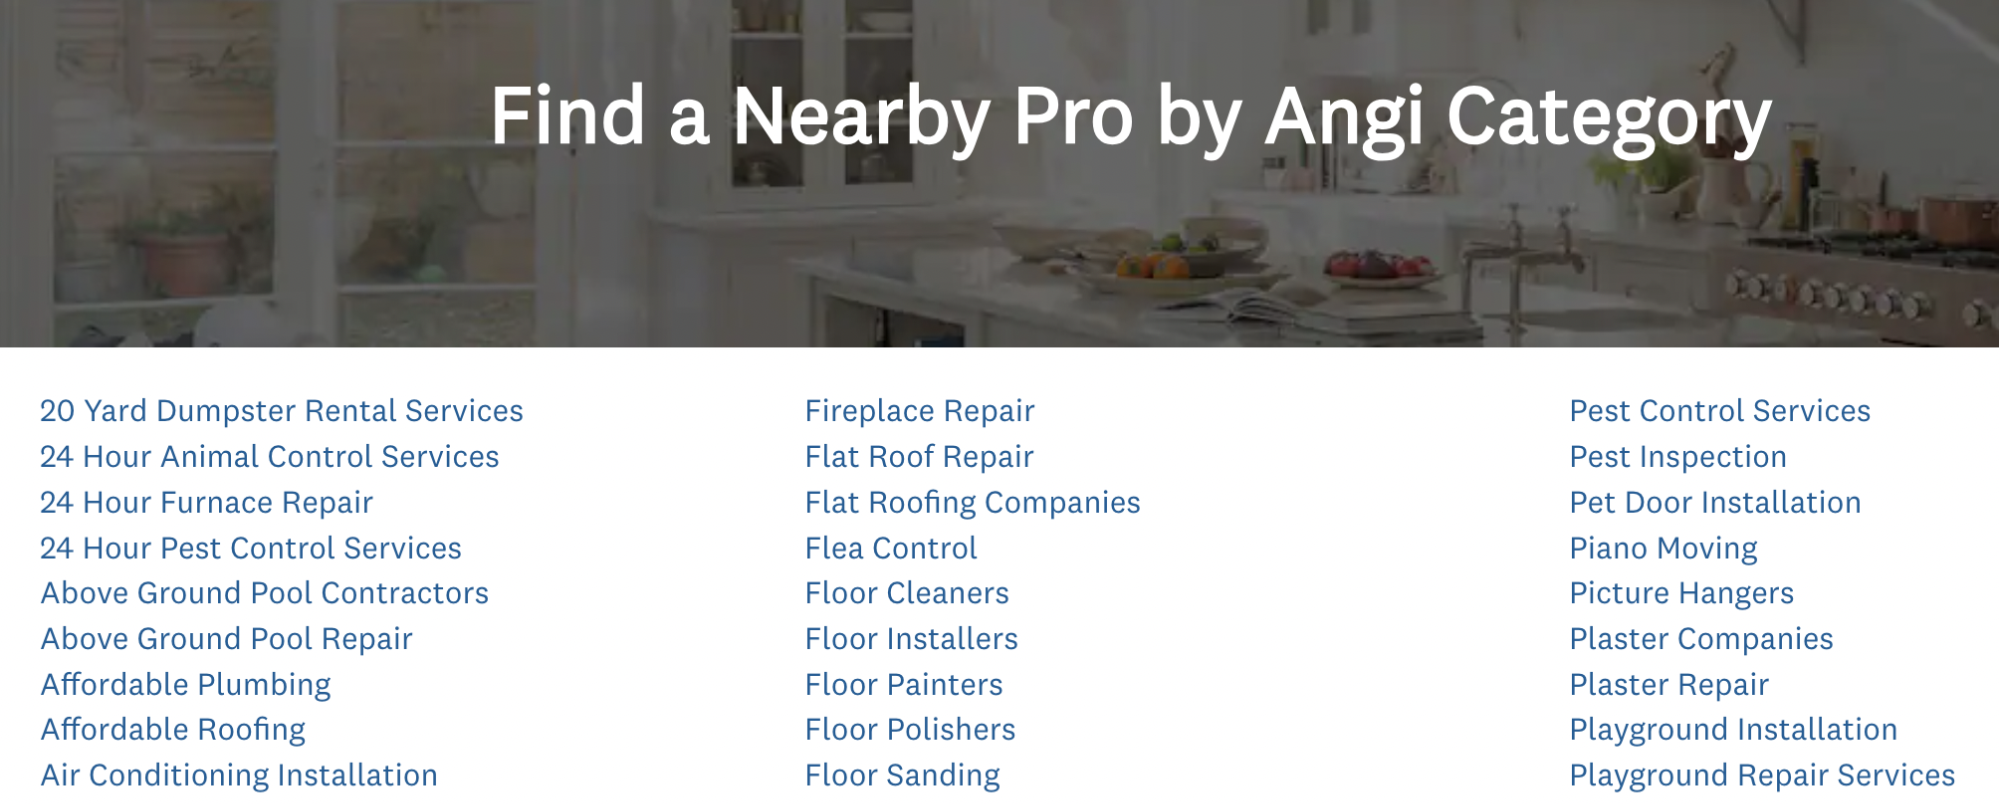 A list showing a portion of the available Angi home service categories